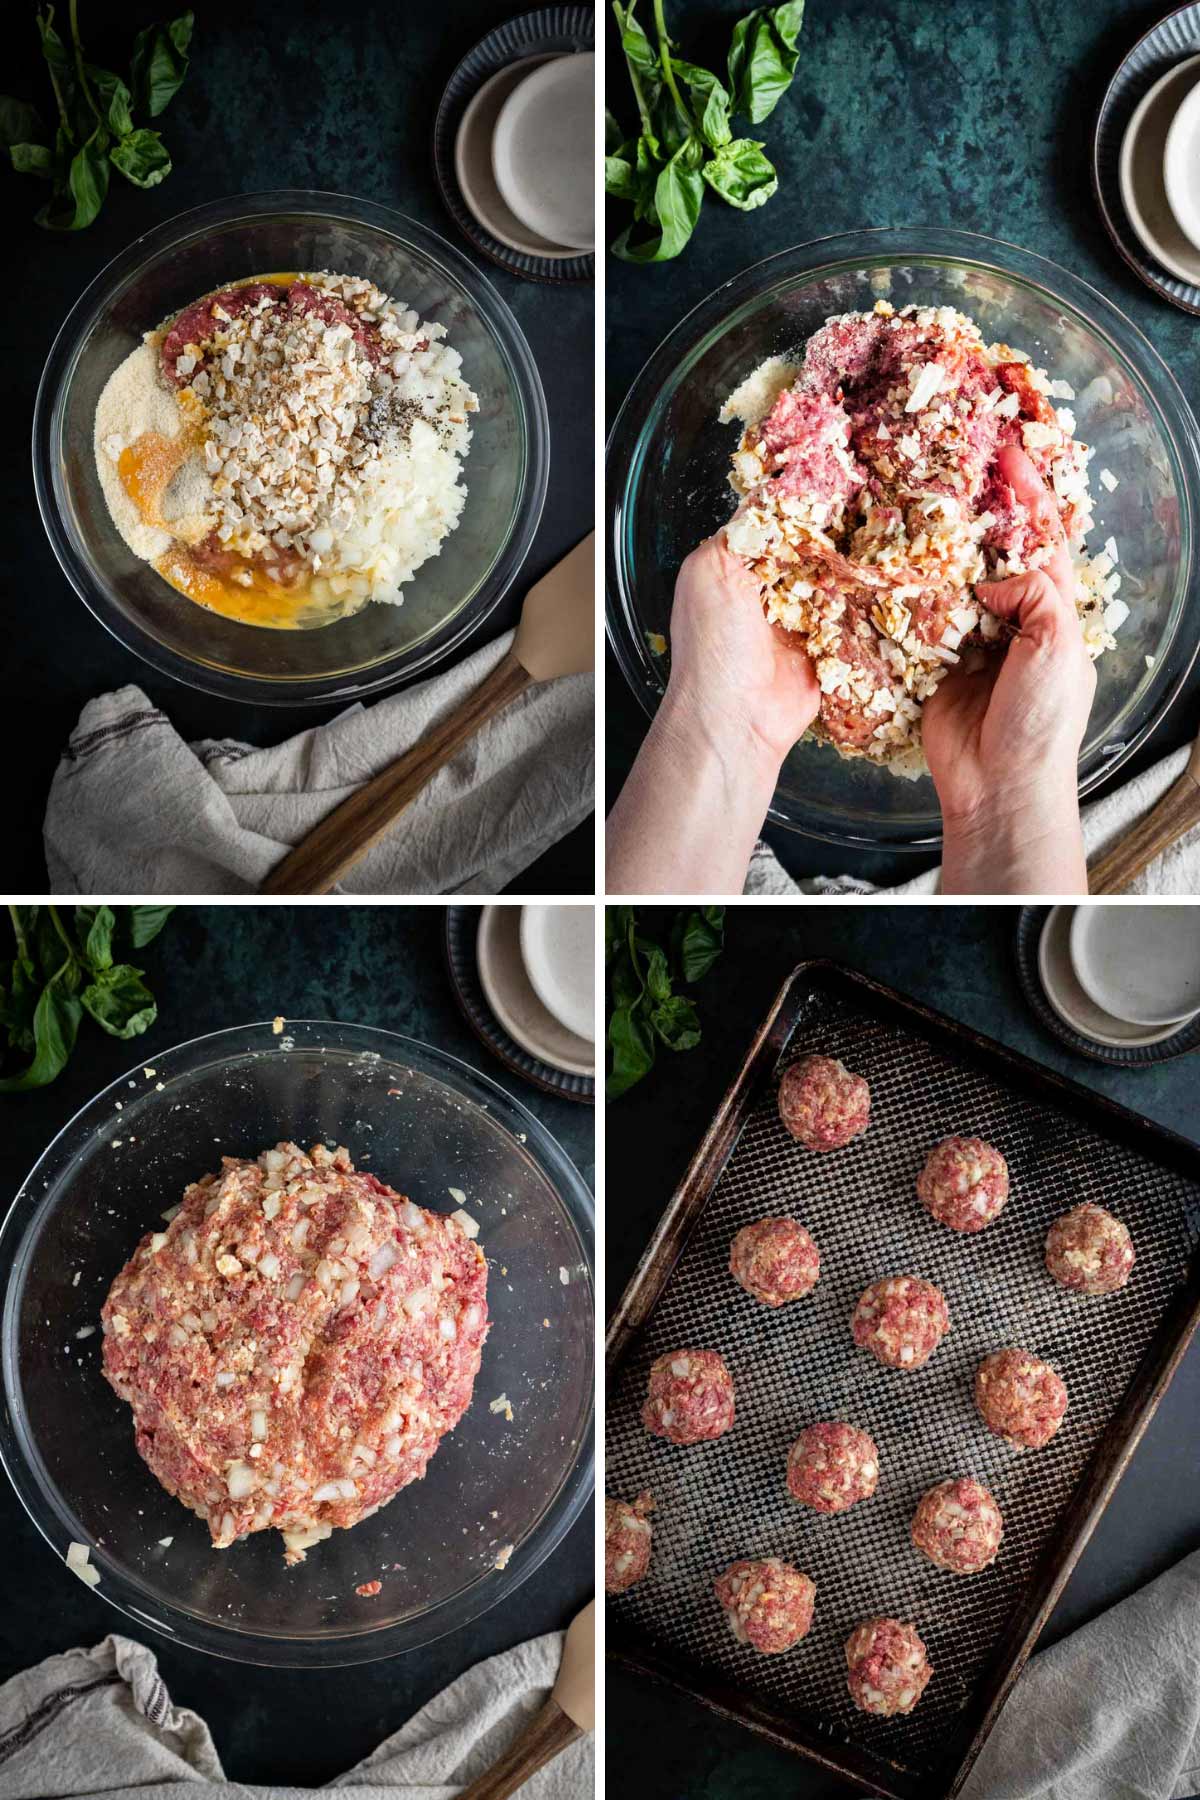 Assembling meatballs and rolling them out.